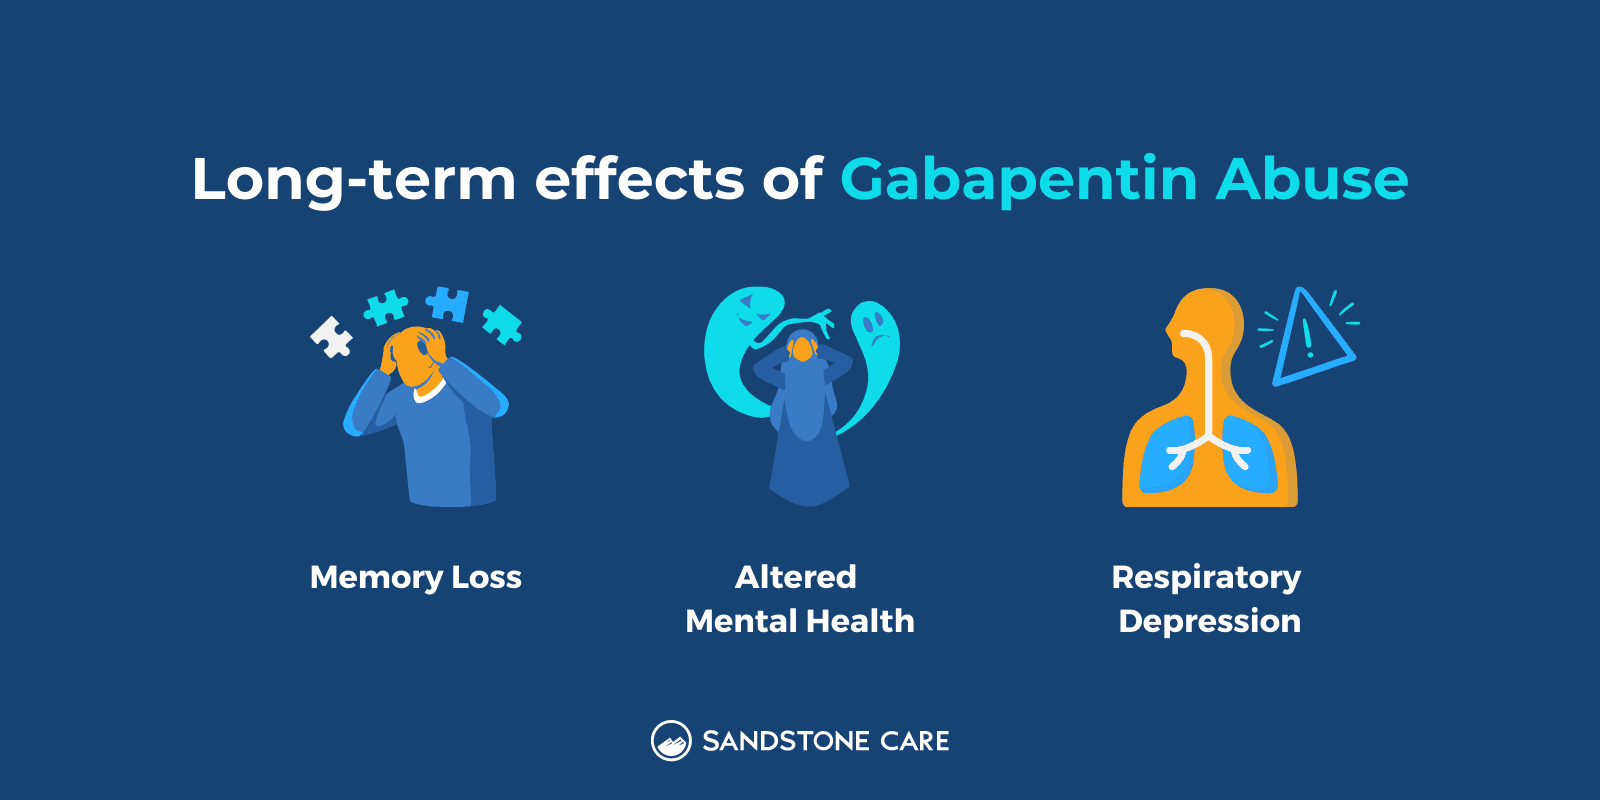 "Long-term effects of Gabapentin Abuse" text written on top of list items and illustrations representing each effect: Memory Loss, Altered Mental Health, Respiratory Depression